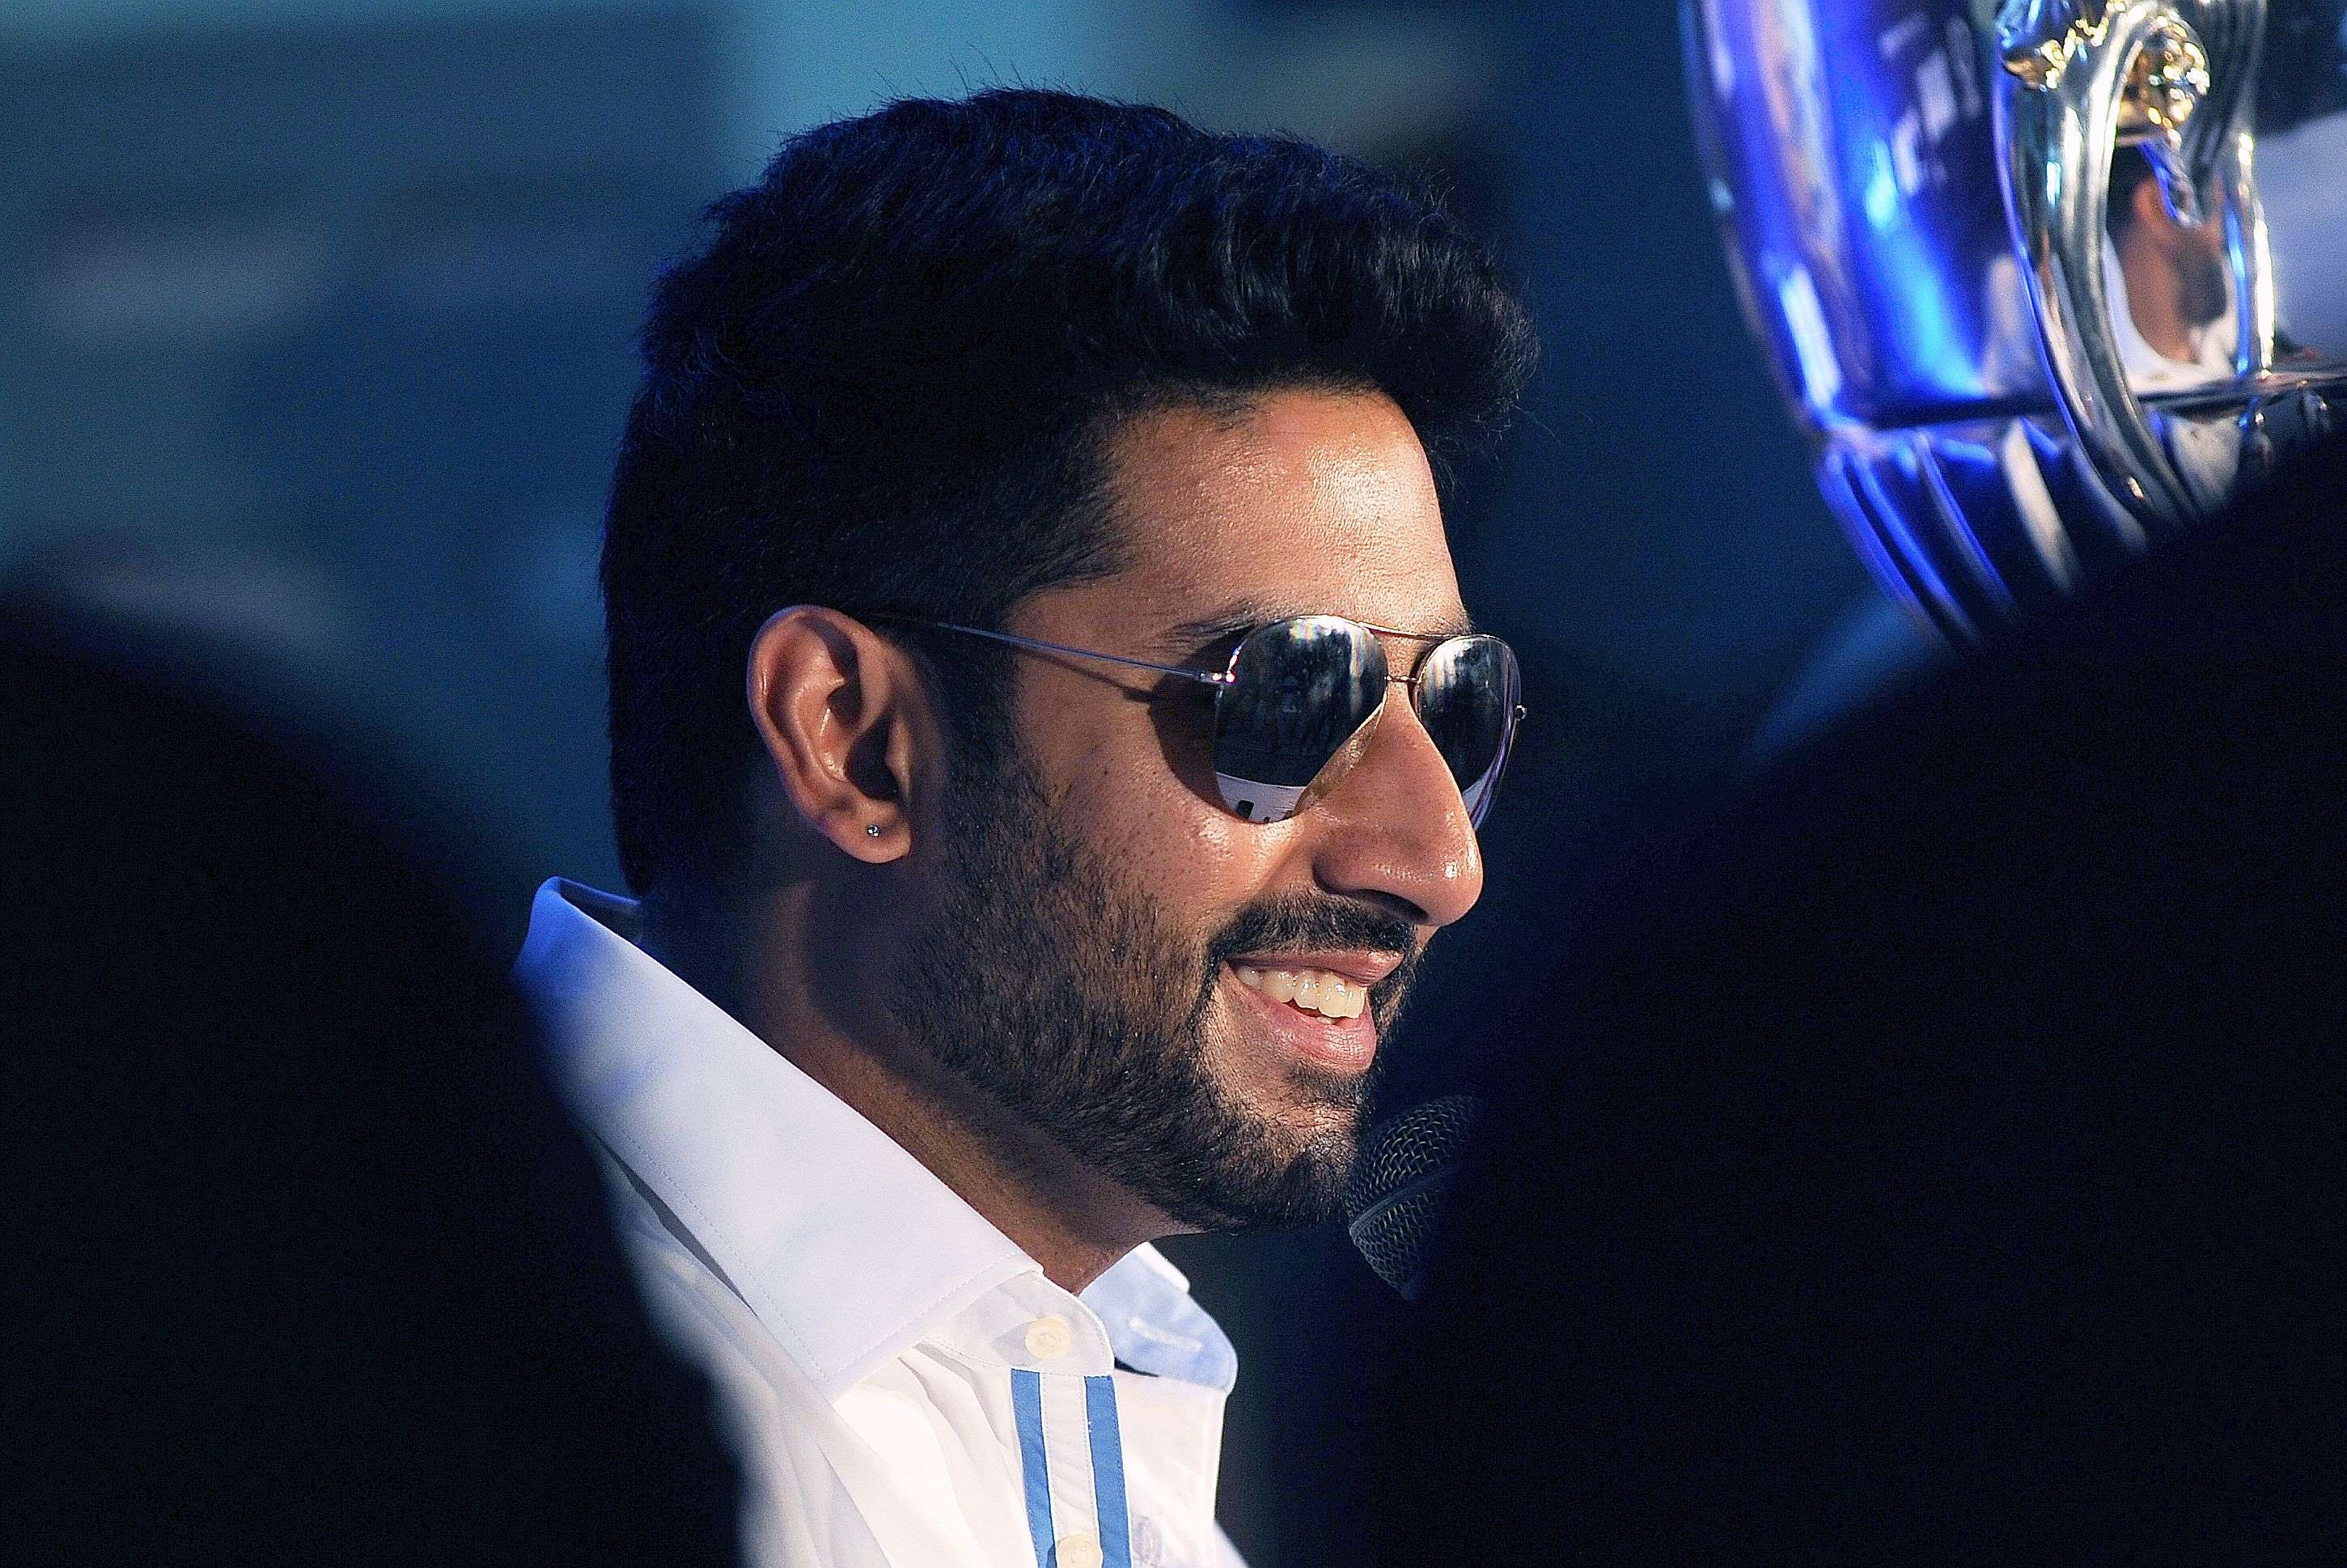 Abhishek Bachchan Surprises Fans in back-to-back housefull theatres! |  Entertainment